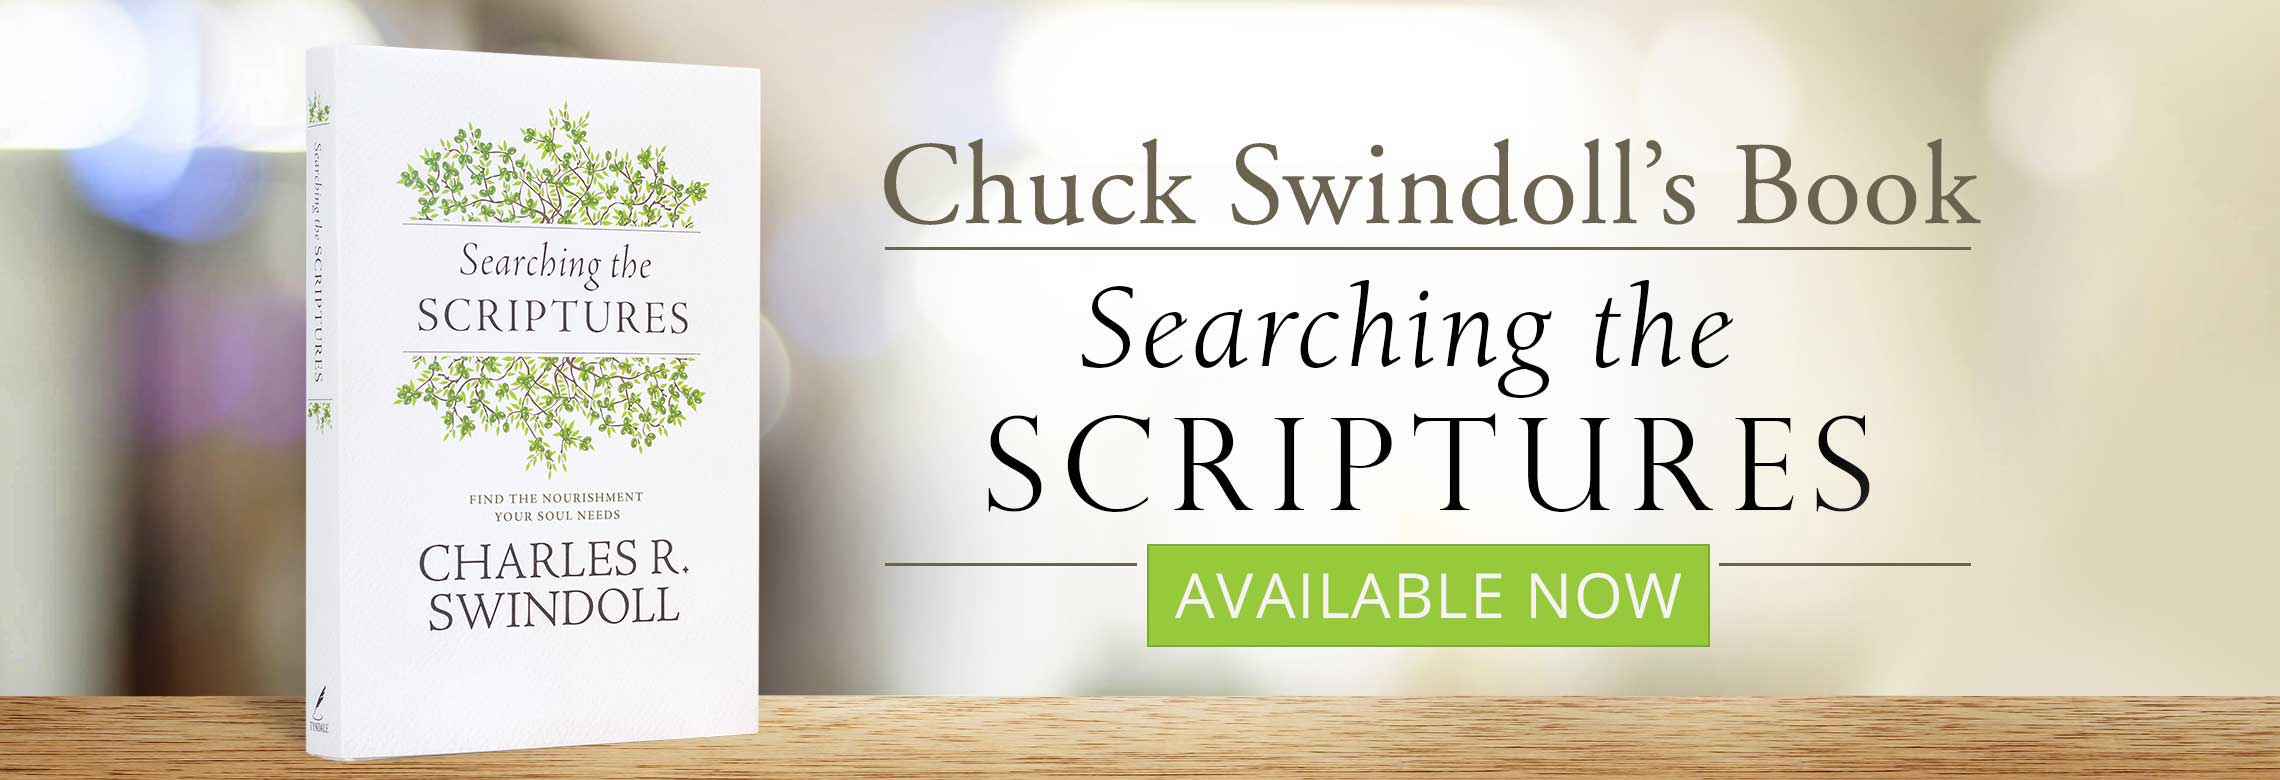 Available Now: Chuck Swindoll's book: Searching the Scriptures